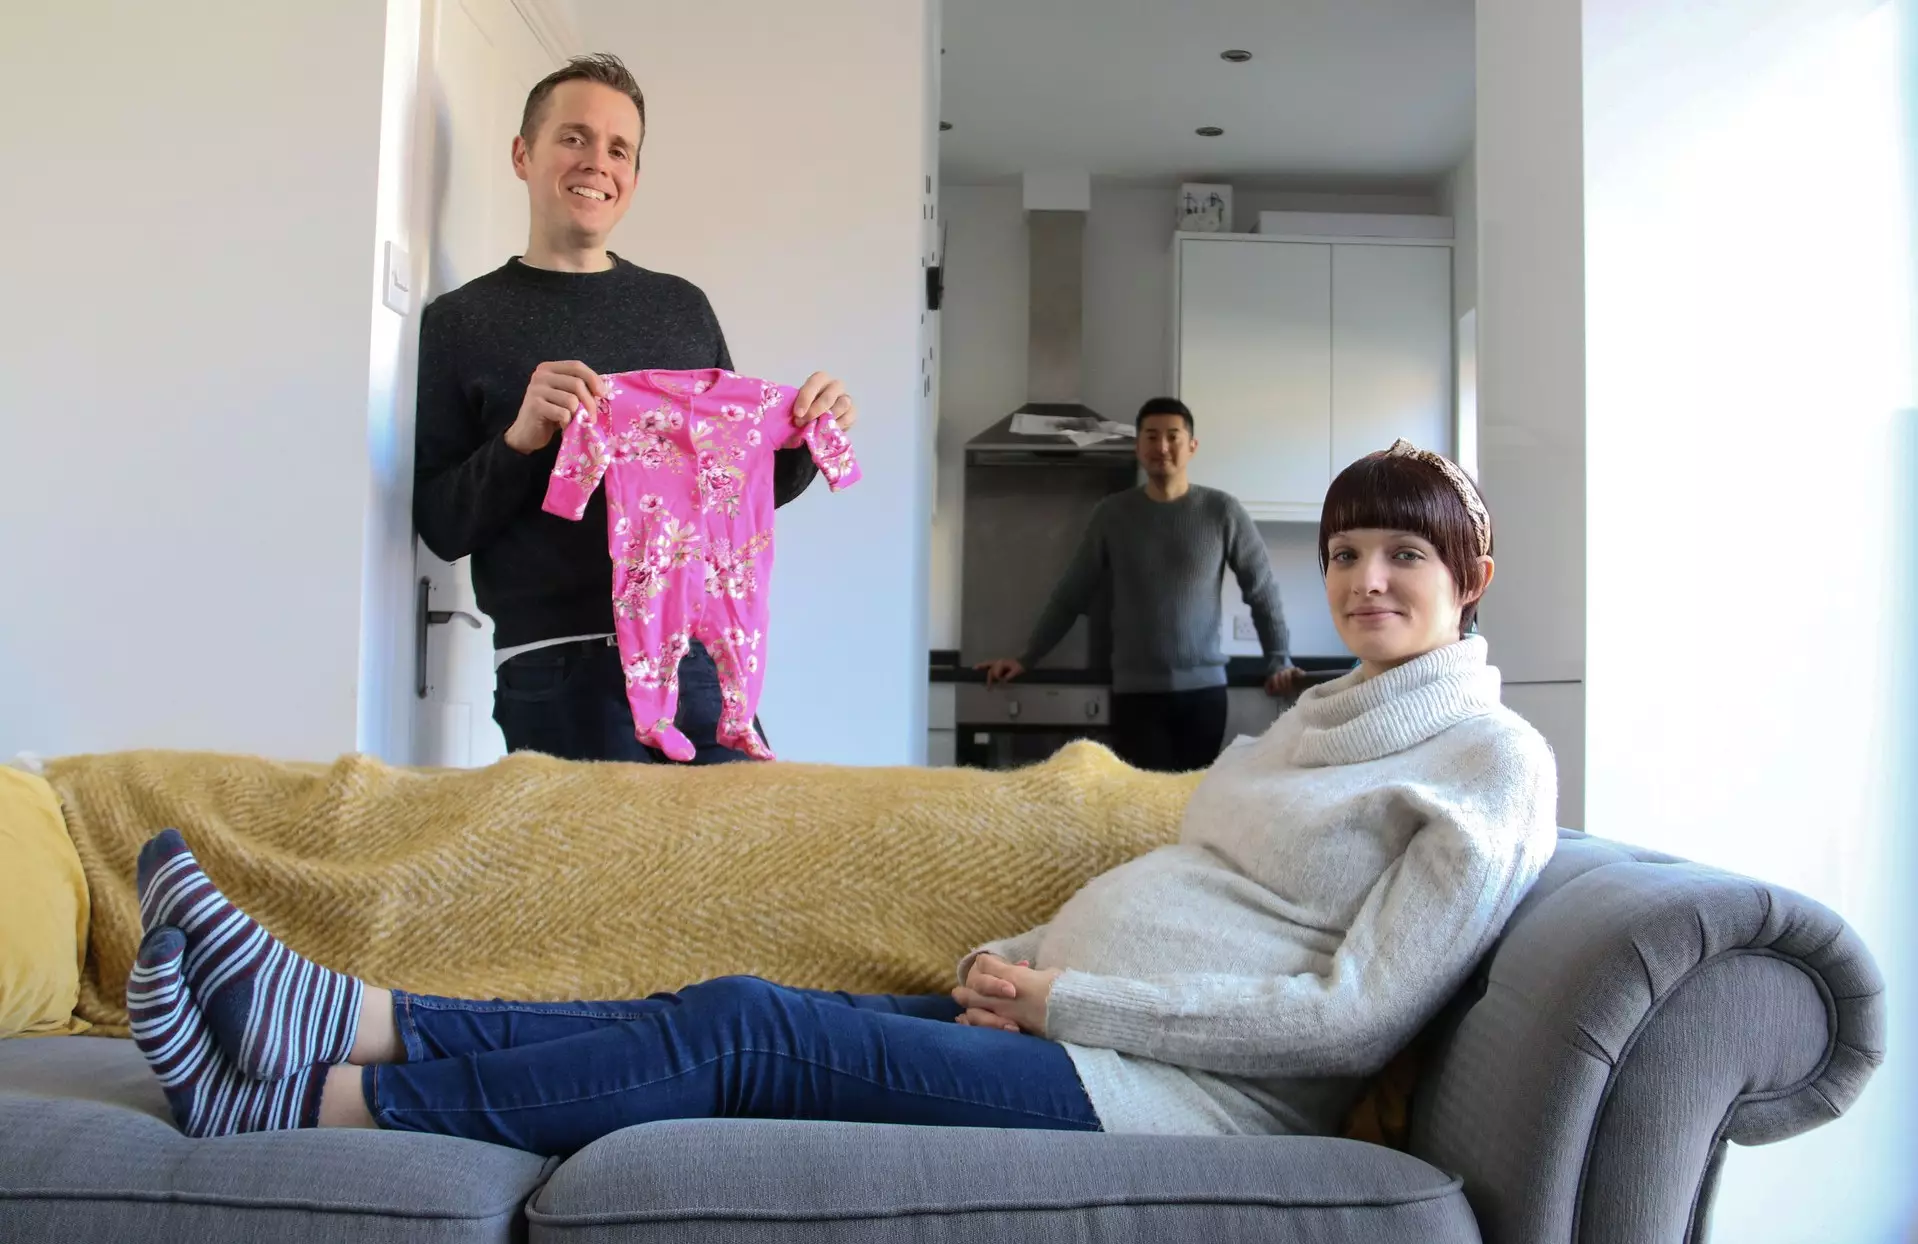 Emma met Kevin and Aki on a surrogacy app (